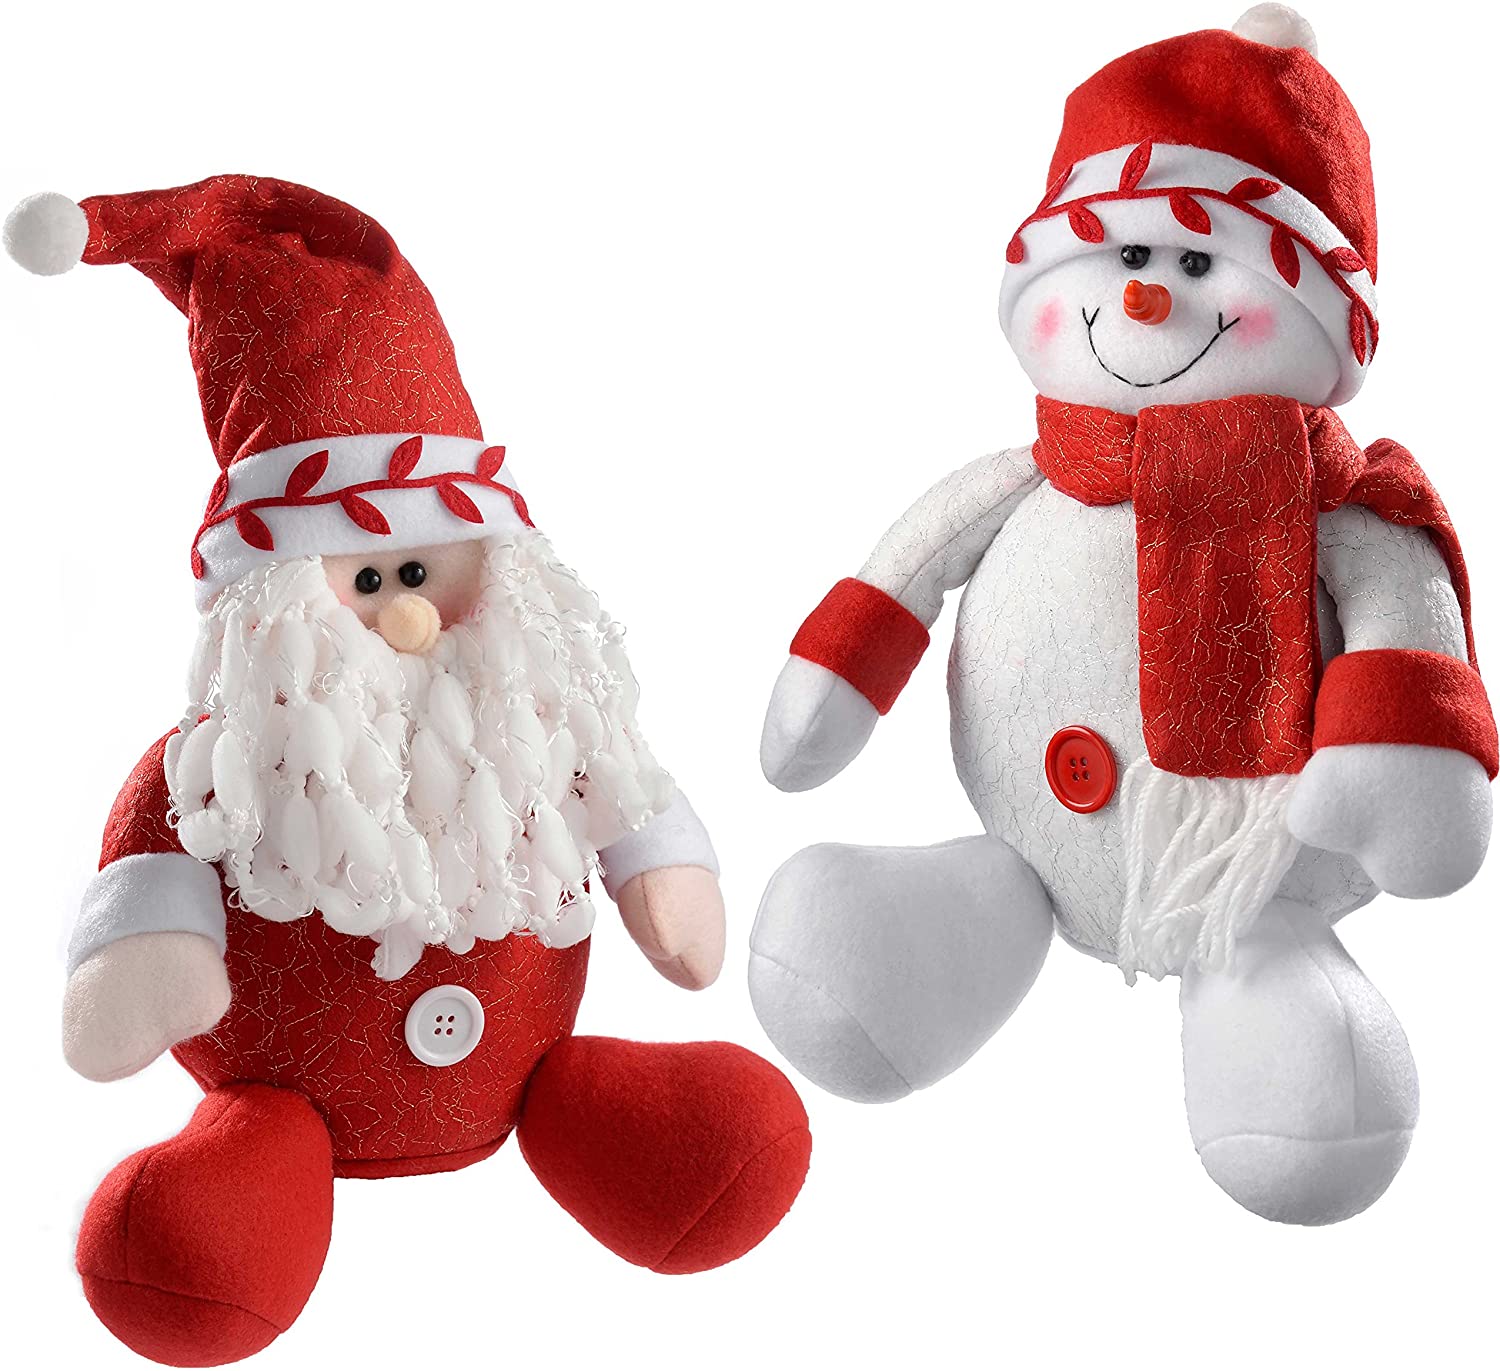 WeRChristmas 28 cm Sitting Santa and Snowman, Set of 2, Red/White